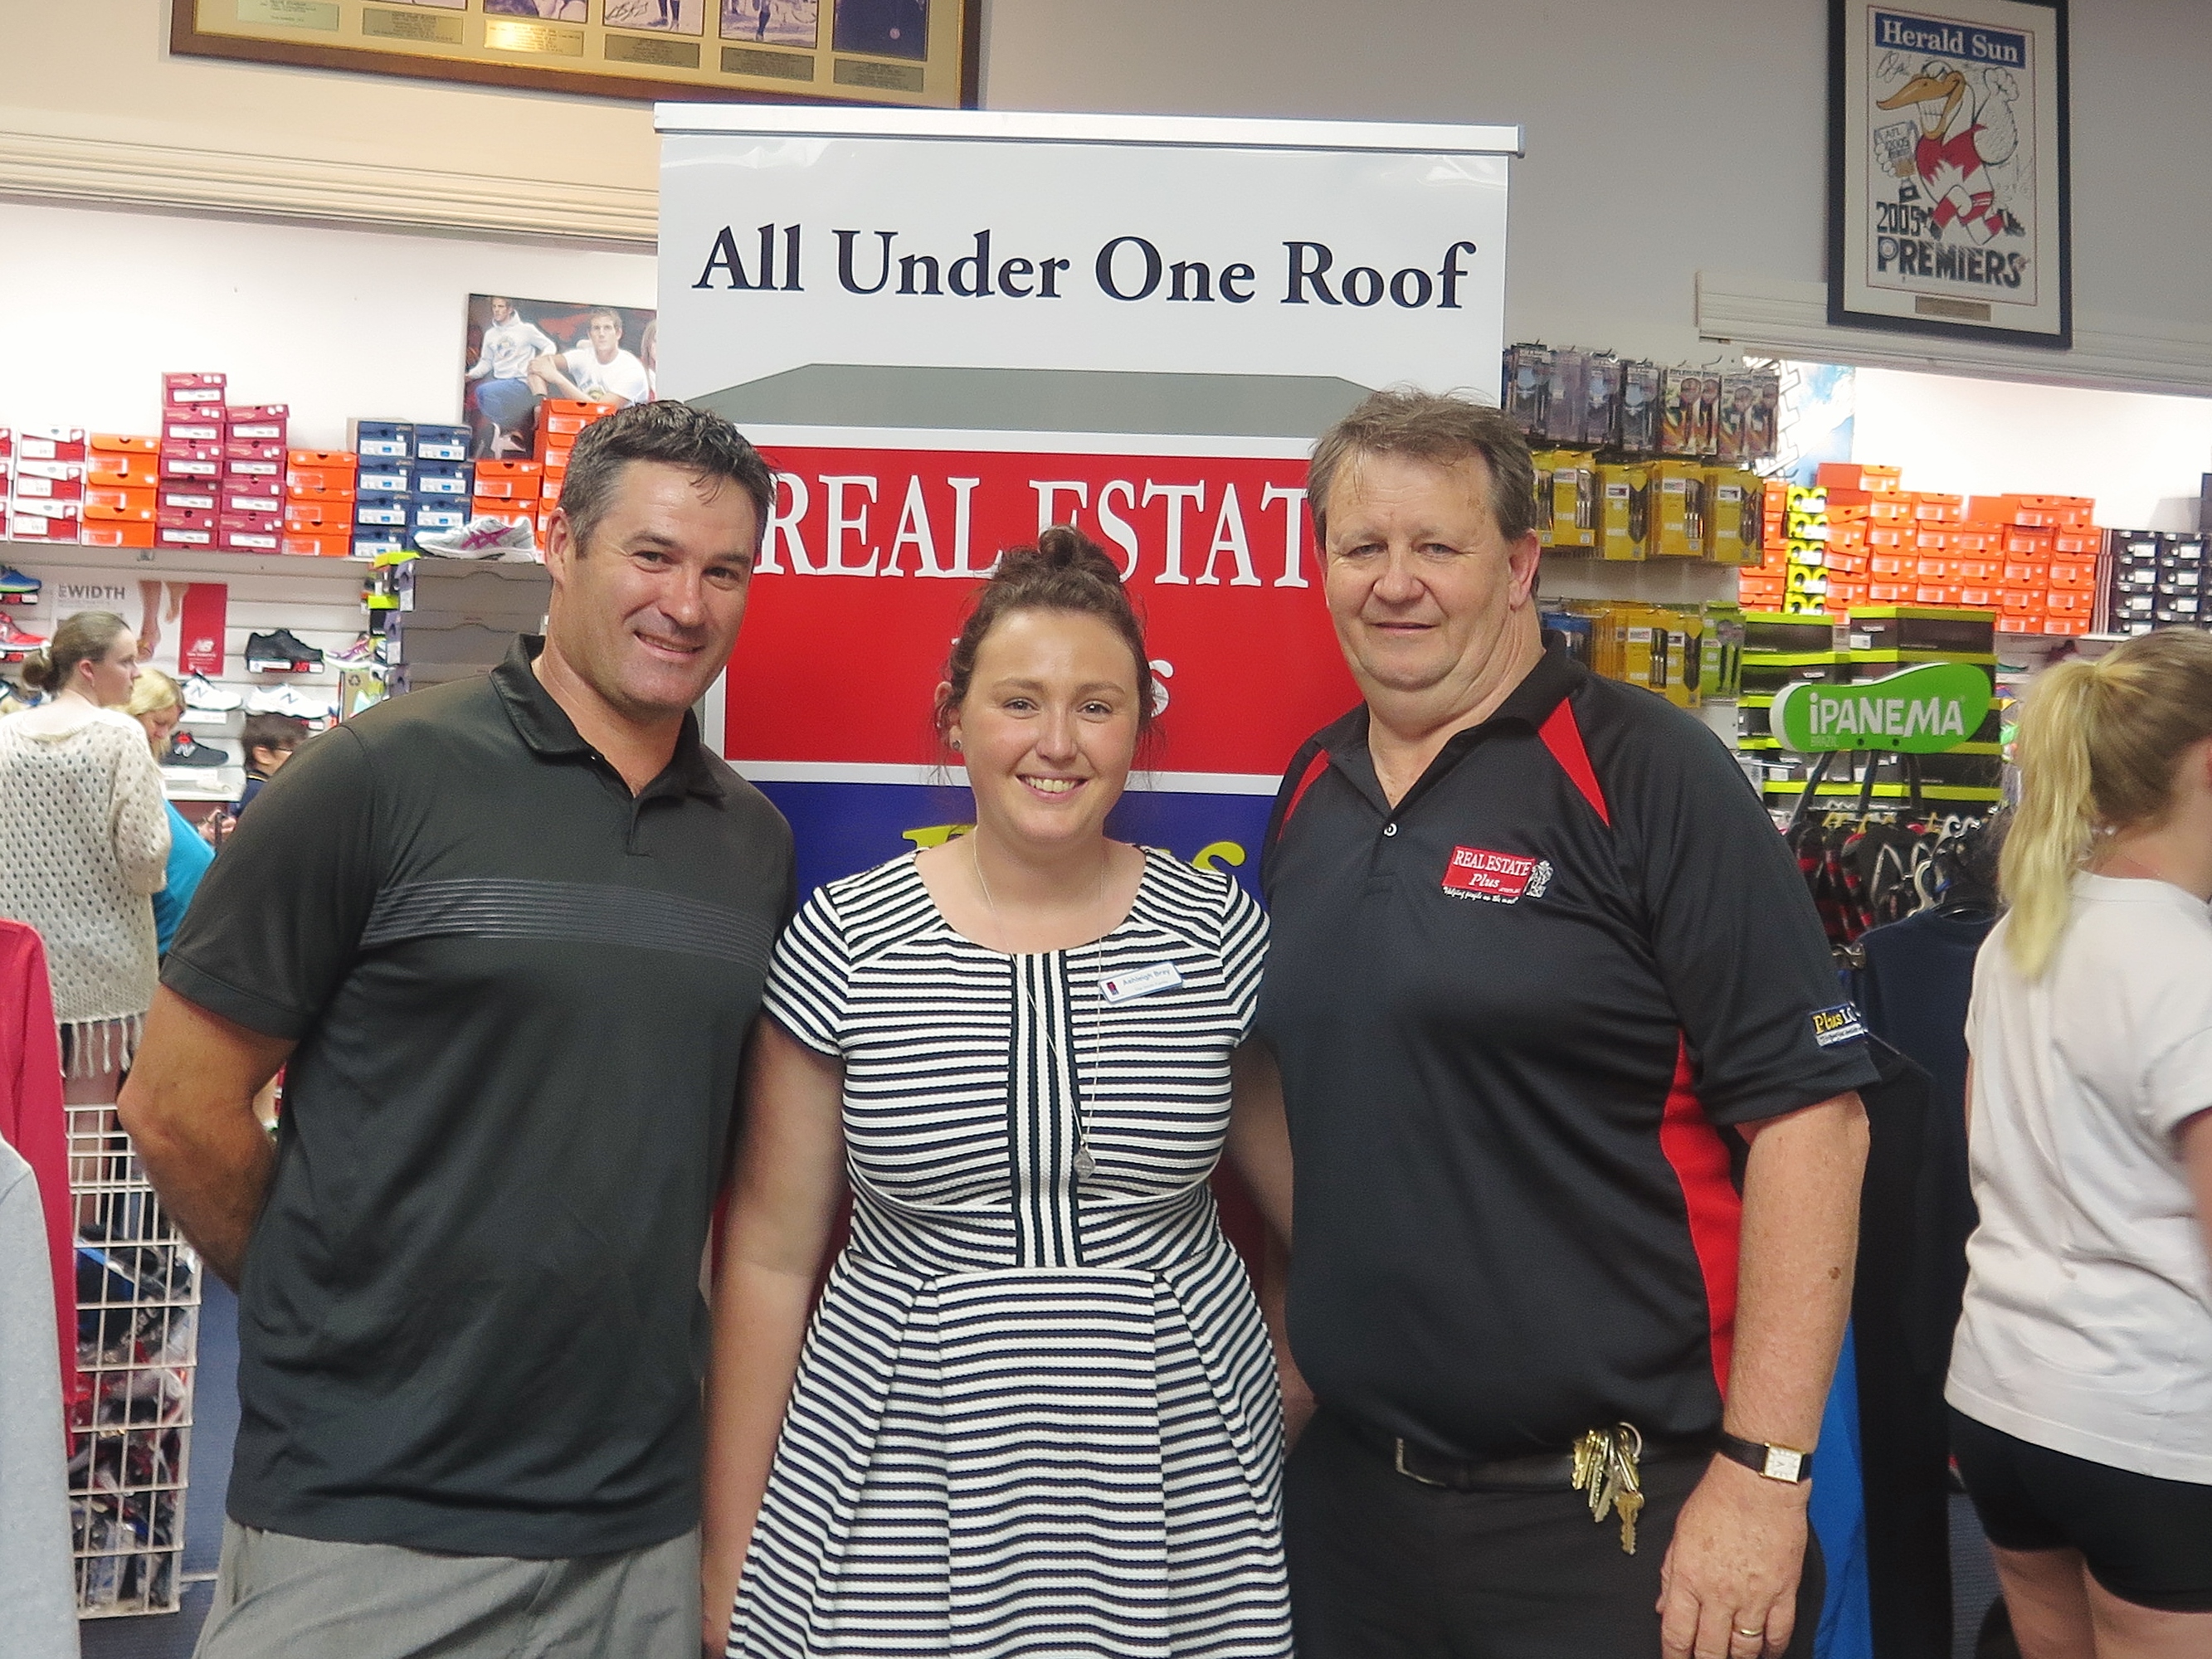 Mike from Slater Gartrell Sports, Ashleigh from The Smith Family and our CEO Milton Rendell. 